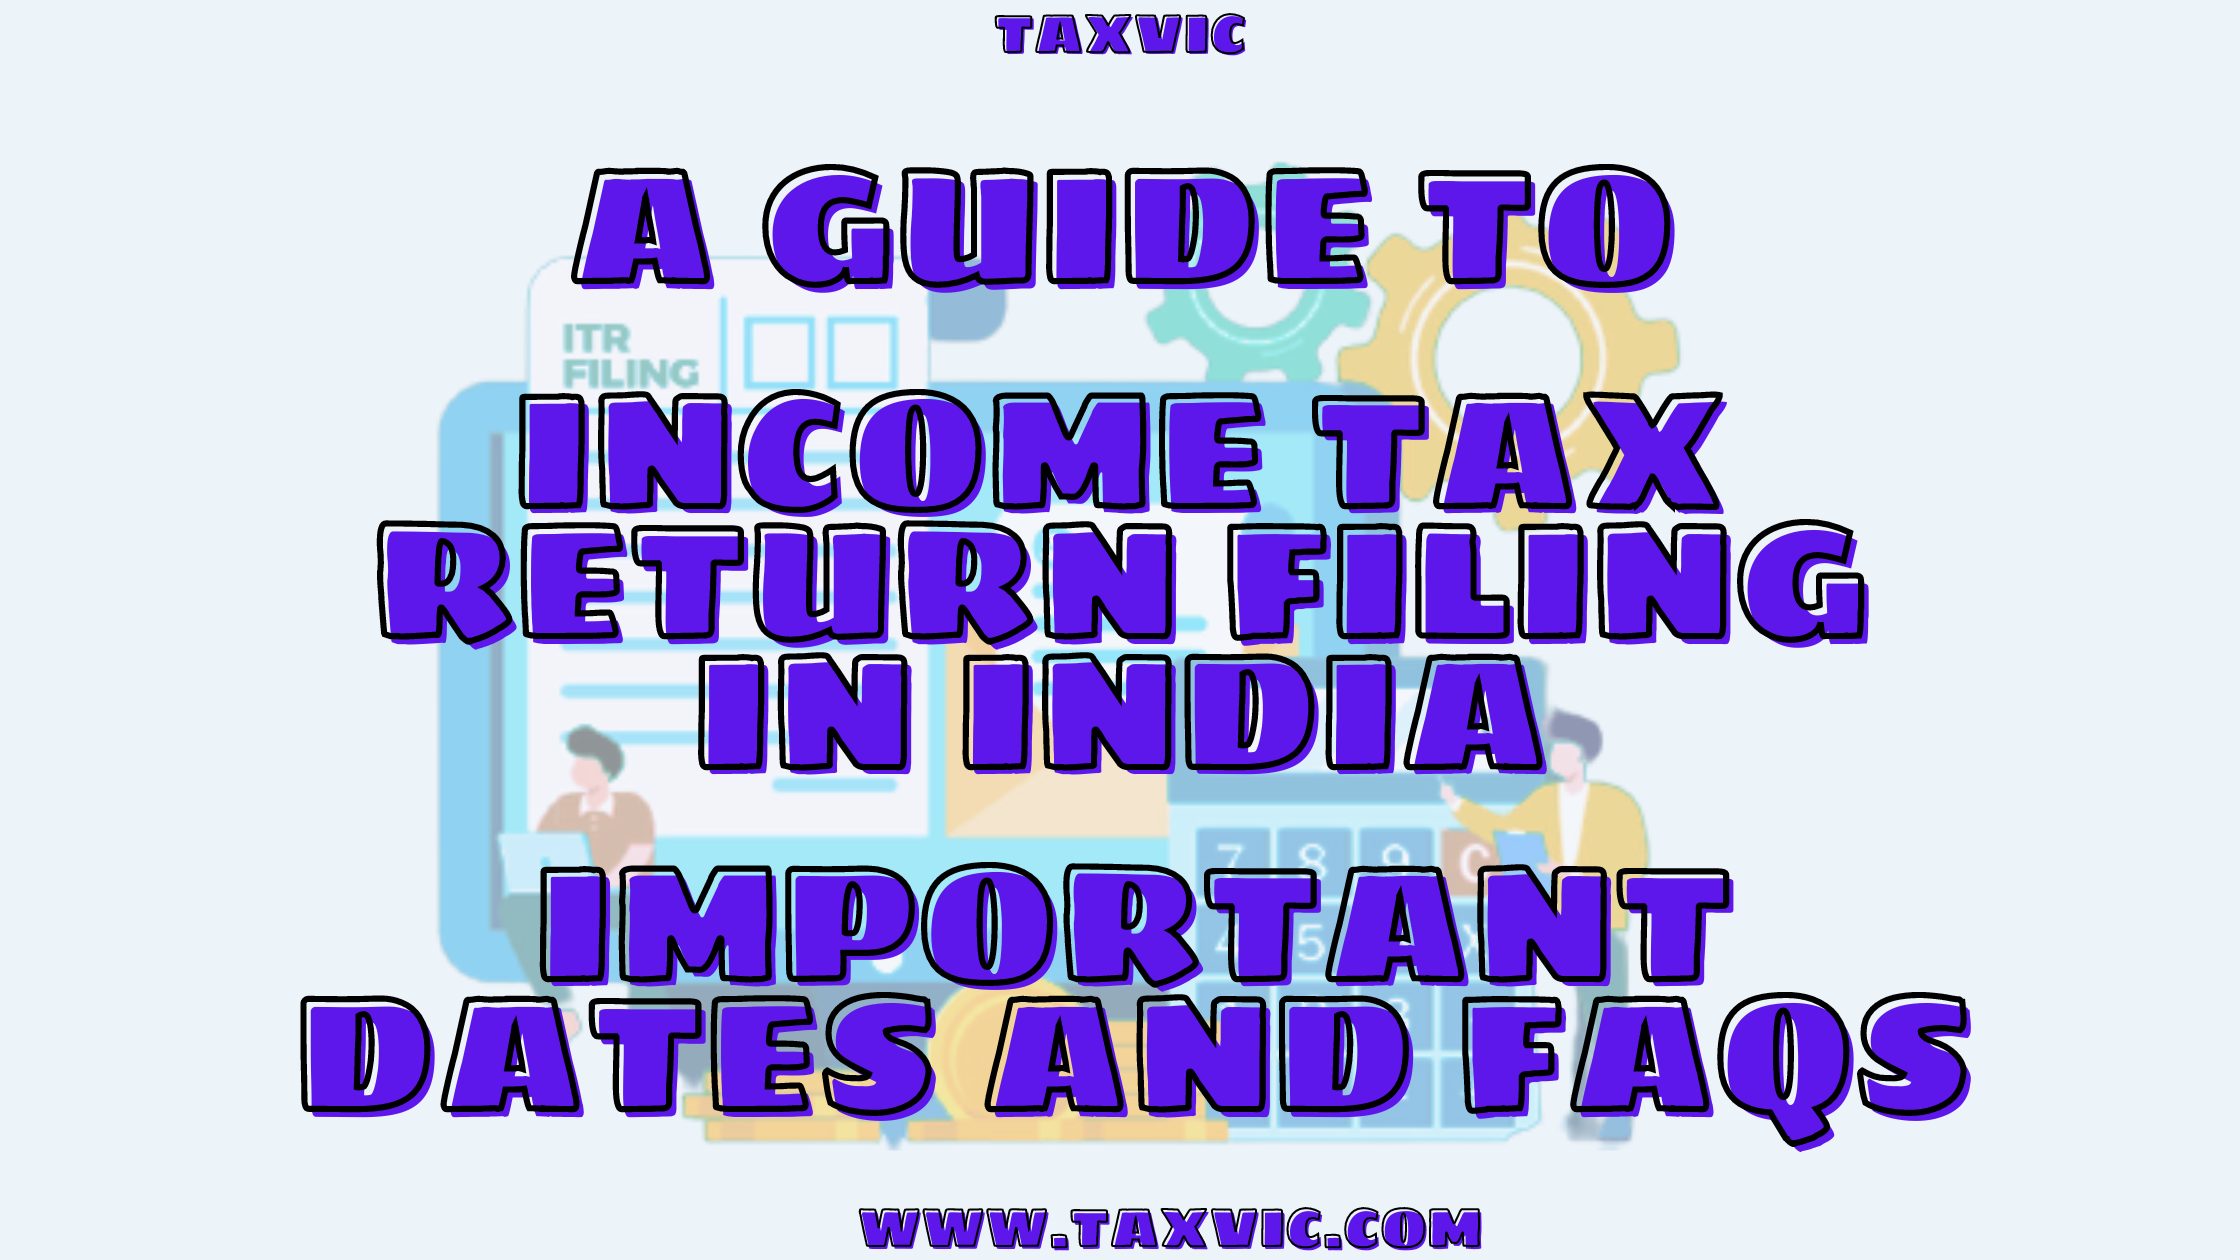 A Guide to Income Tax Return Filing in India: Important Dates and FAQs